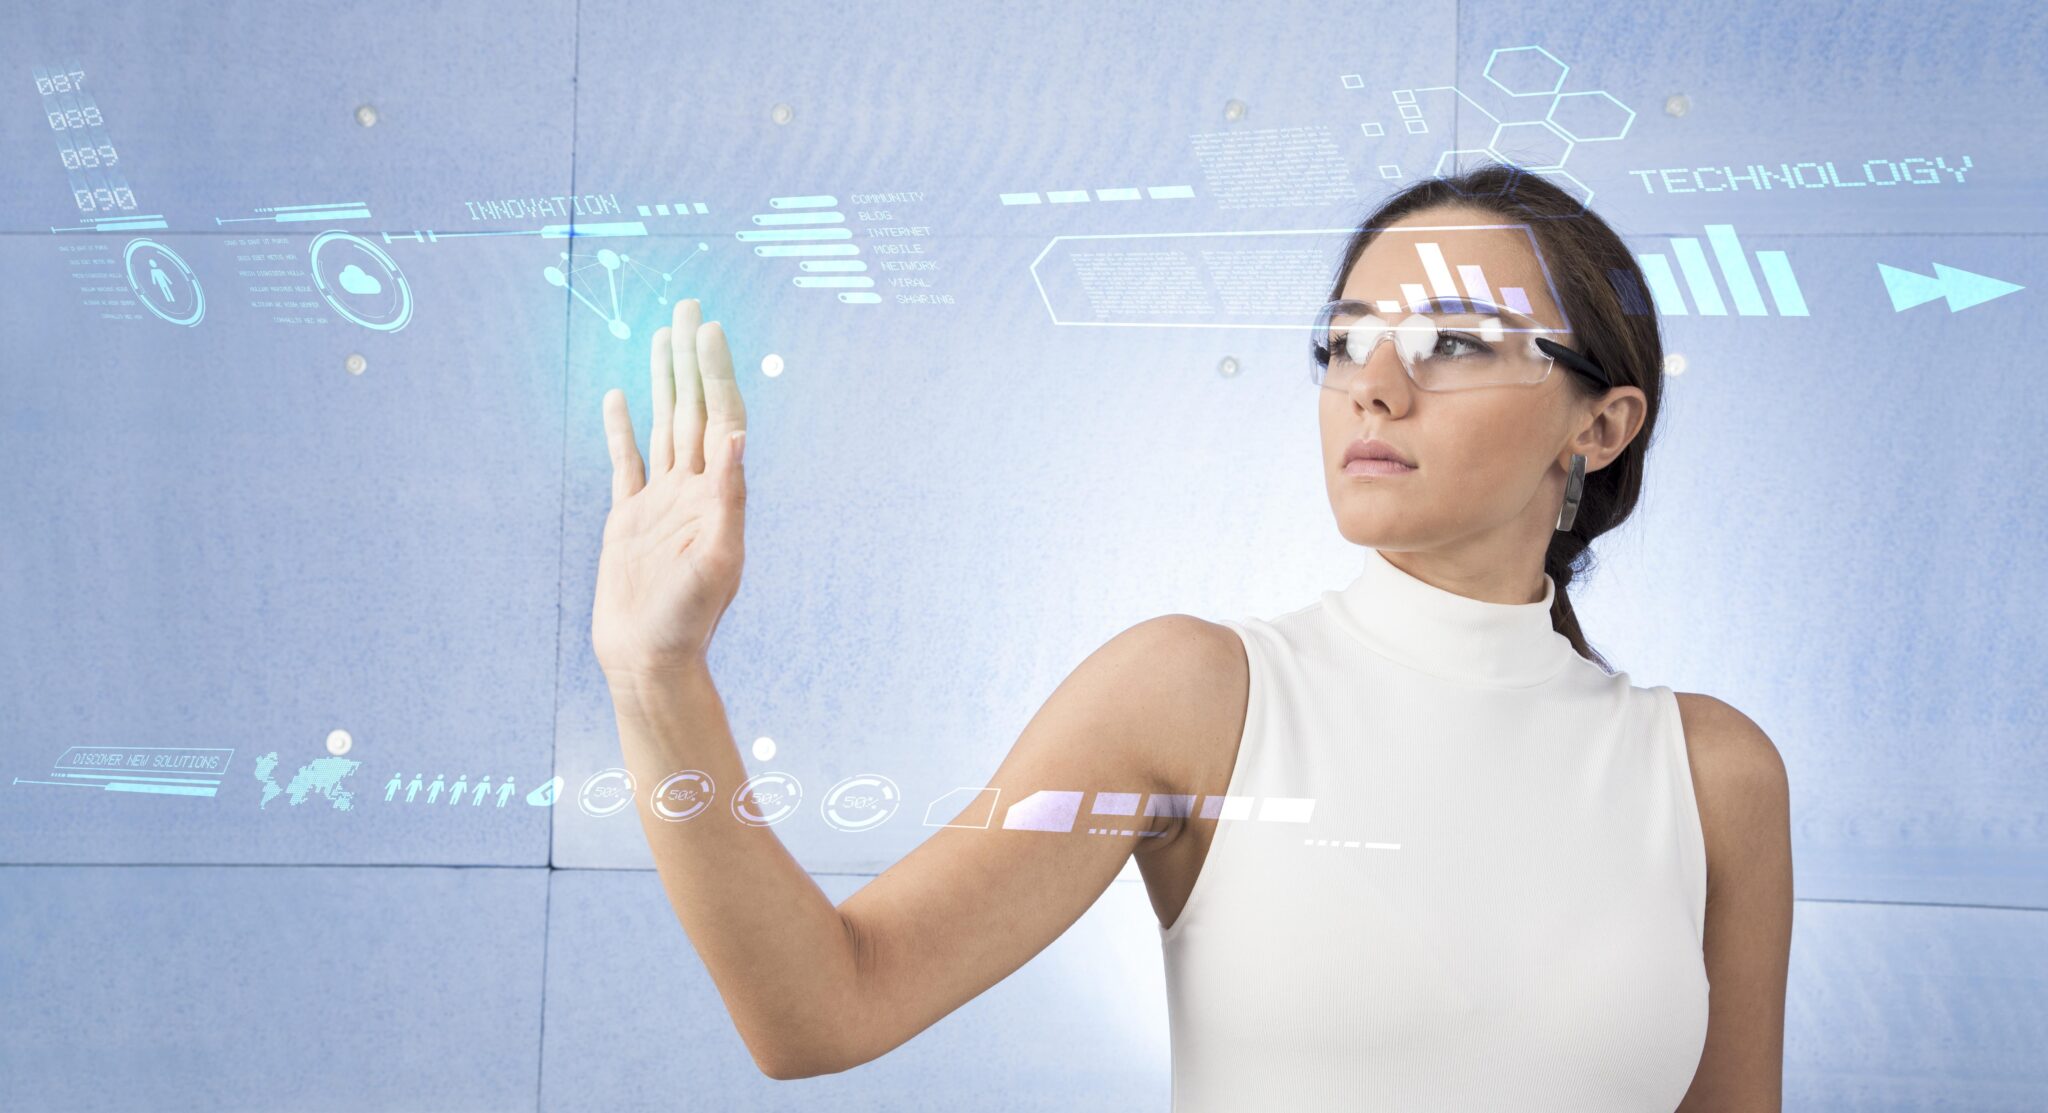 A young brunette woman in a white high-tech dress is wearing smart glasses and pressing her hand up against a holographic screen